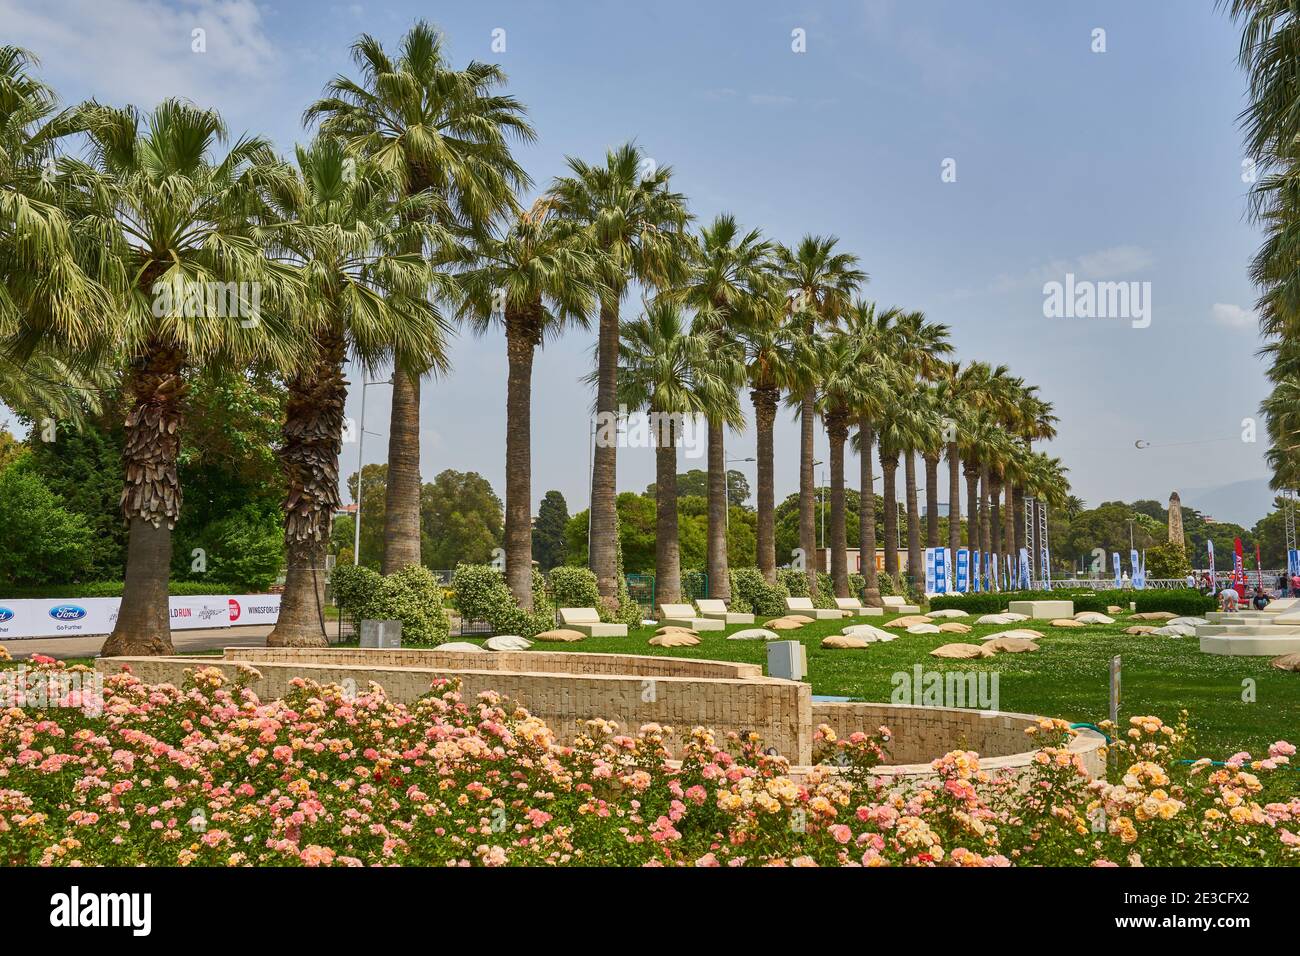 A view of the Public park called K lt rpark translated culture park , also known as Kulturpark in Izmir, Turkey. Stock Photo